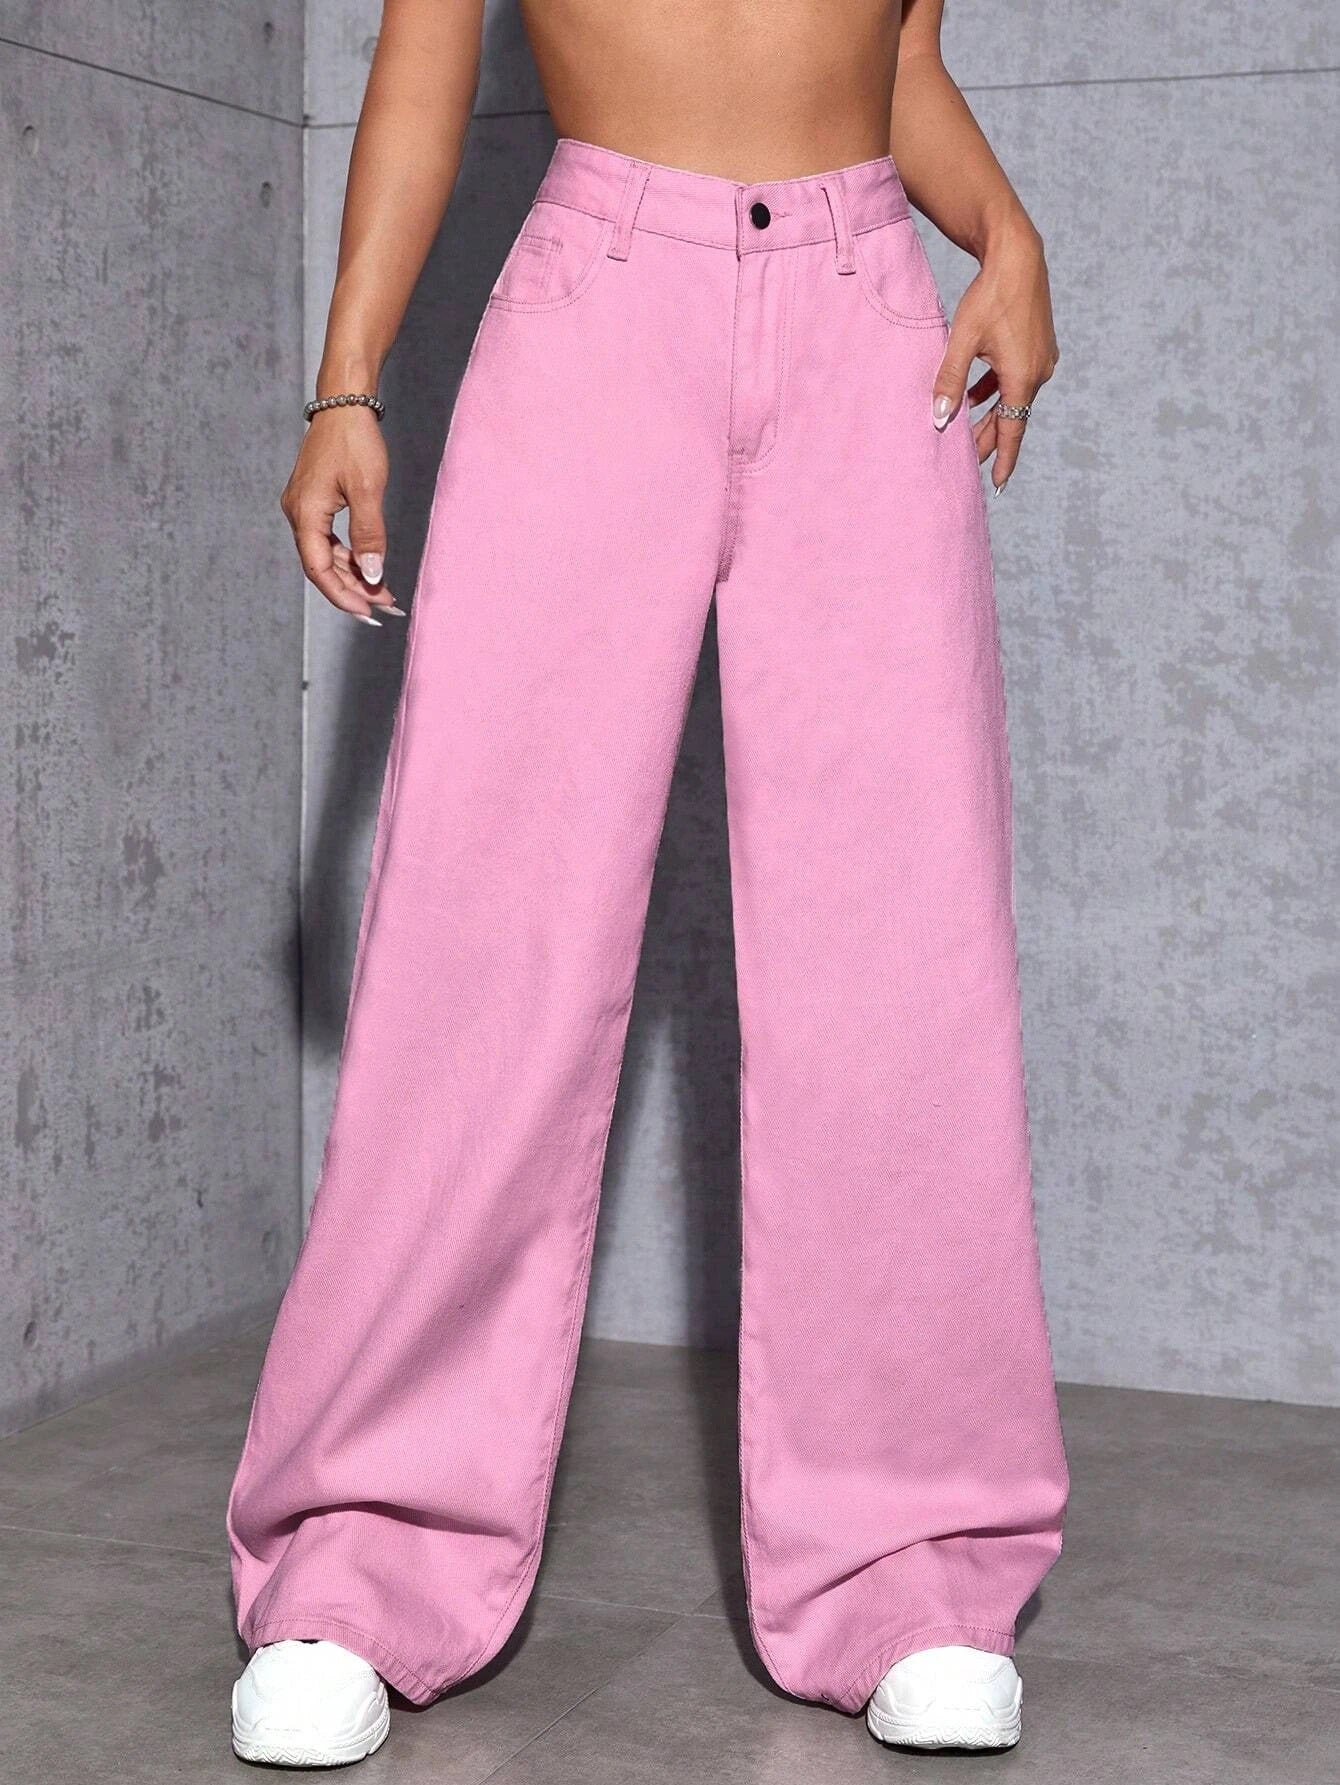 CM-BS522322 Women Casual Seoul Style High Waist Solid Wide Leg Jeans - Pink